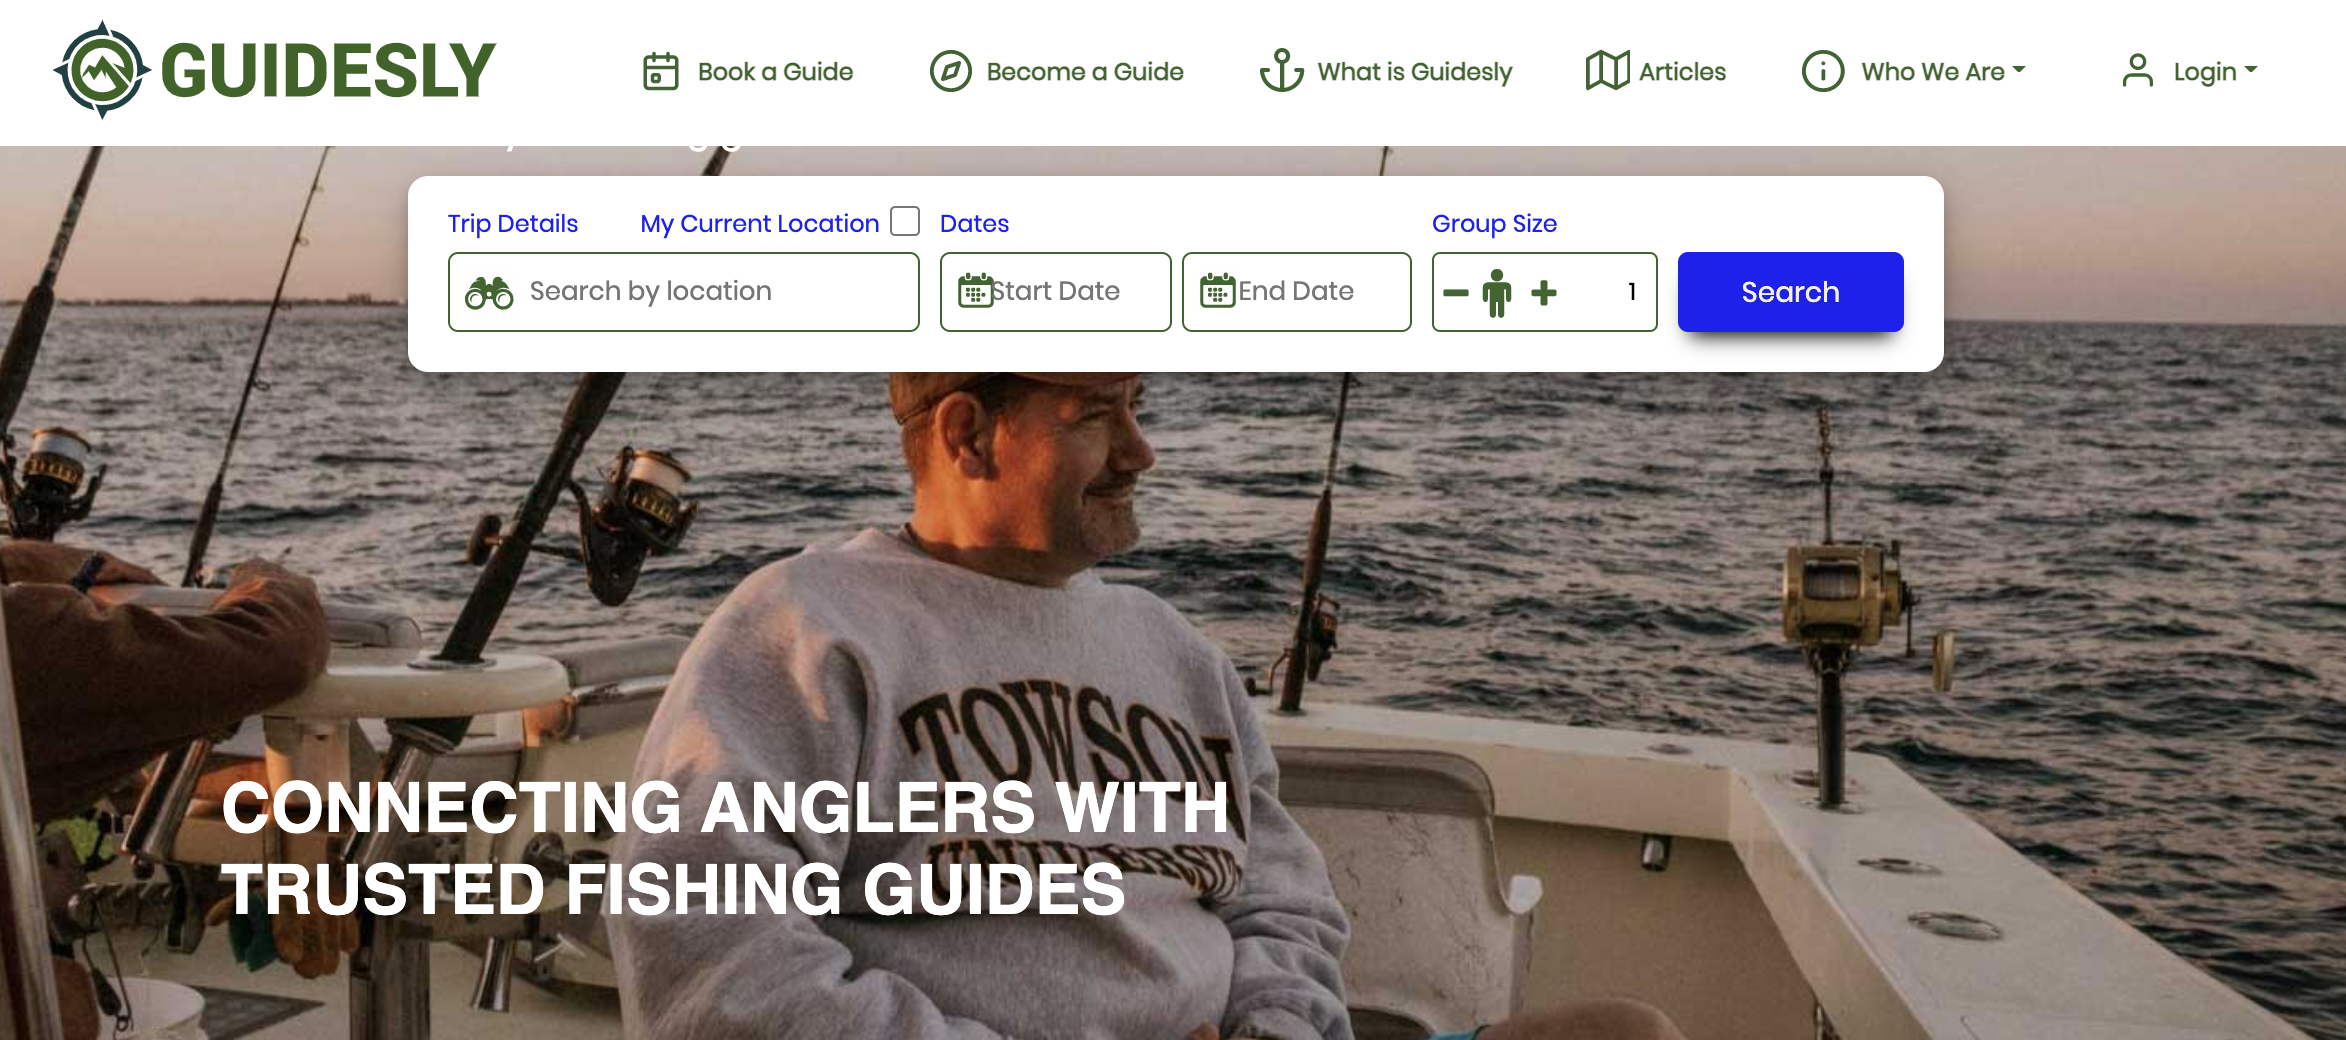 Guidesly.com - Great website for fishing guides and anglers